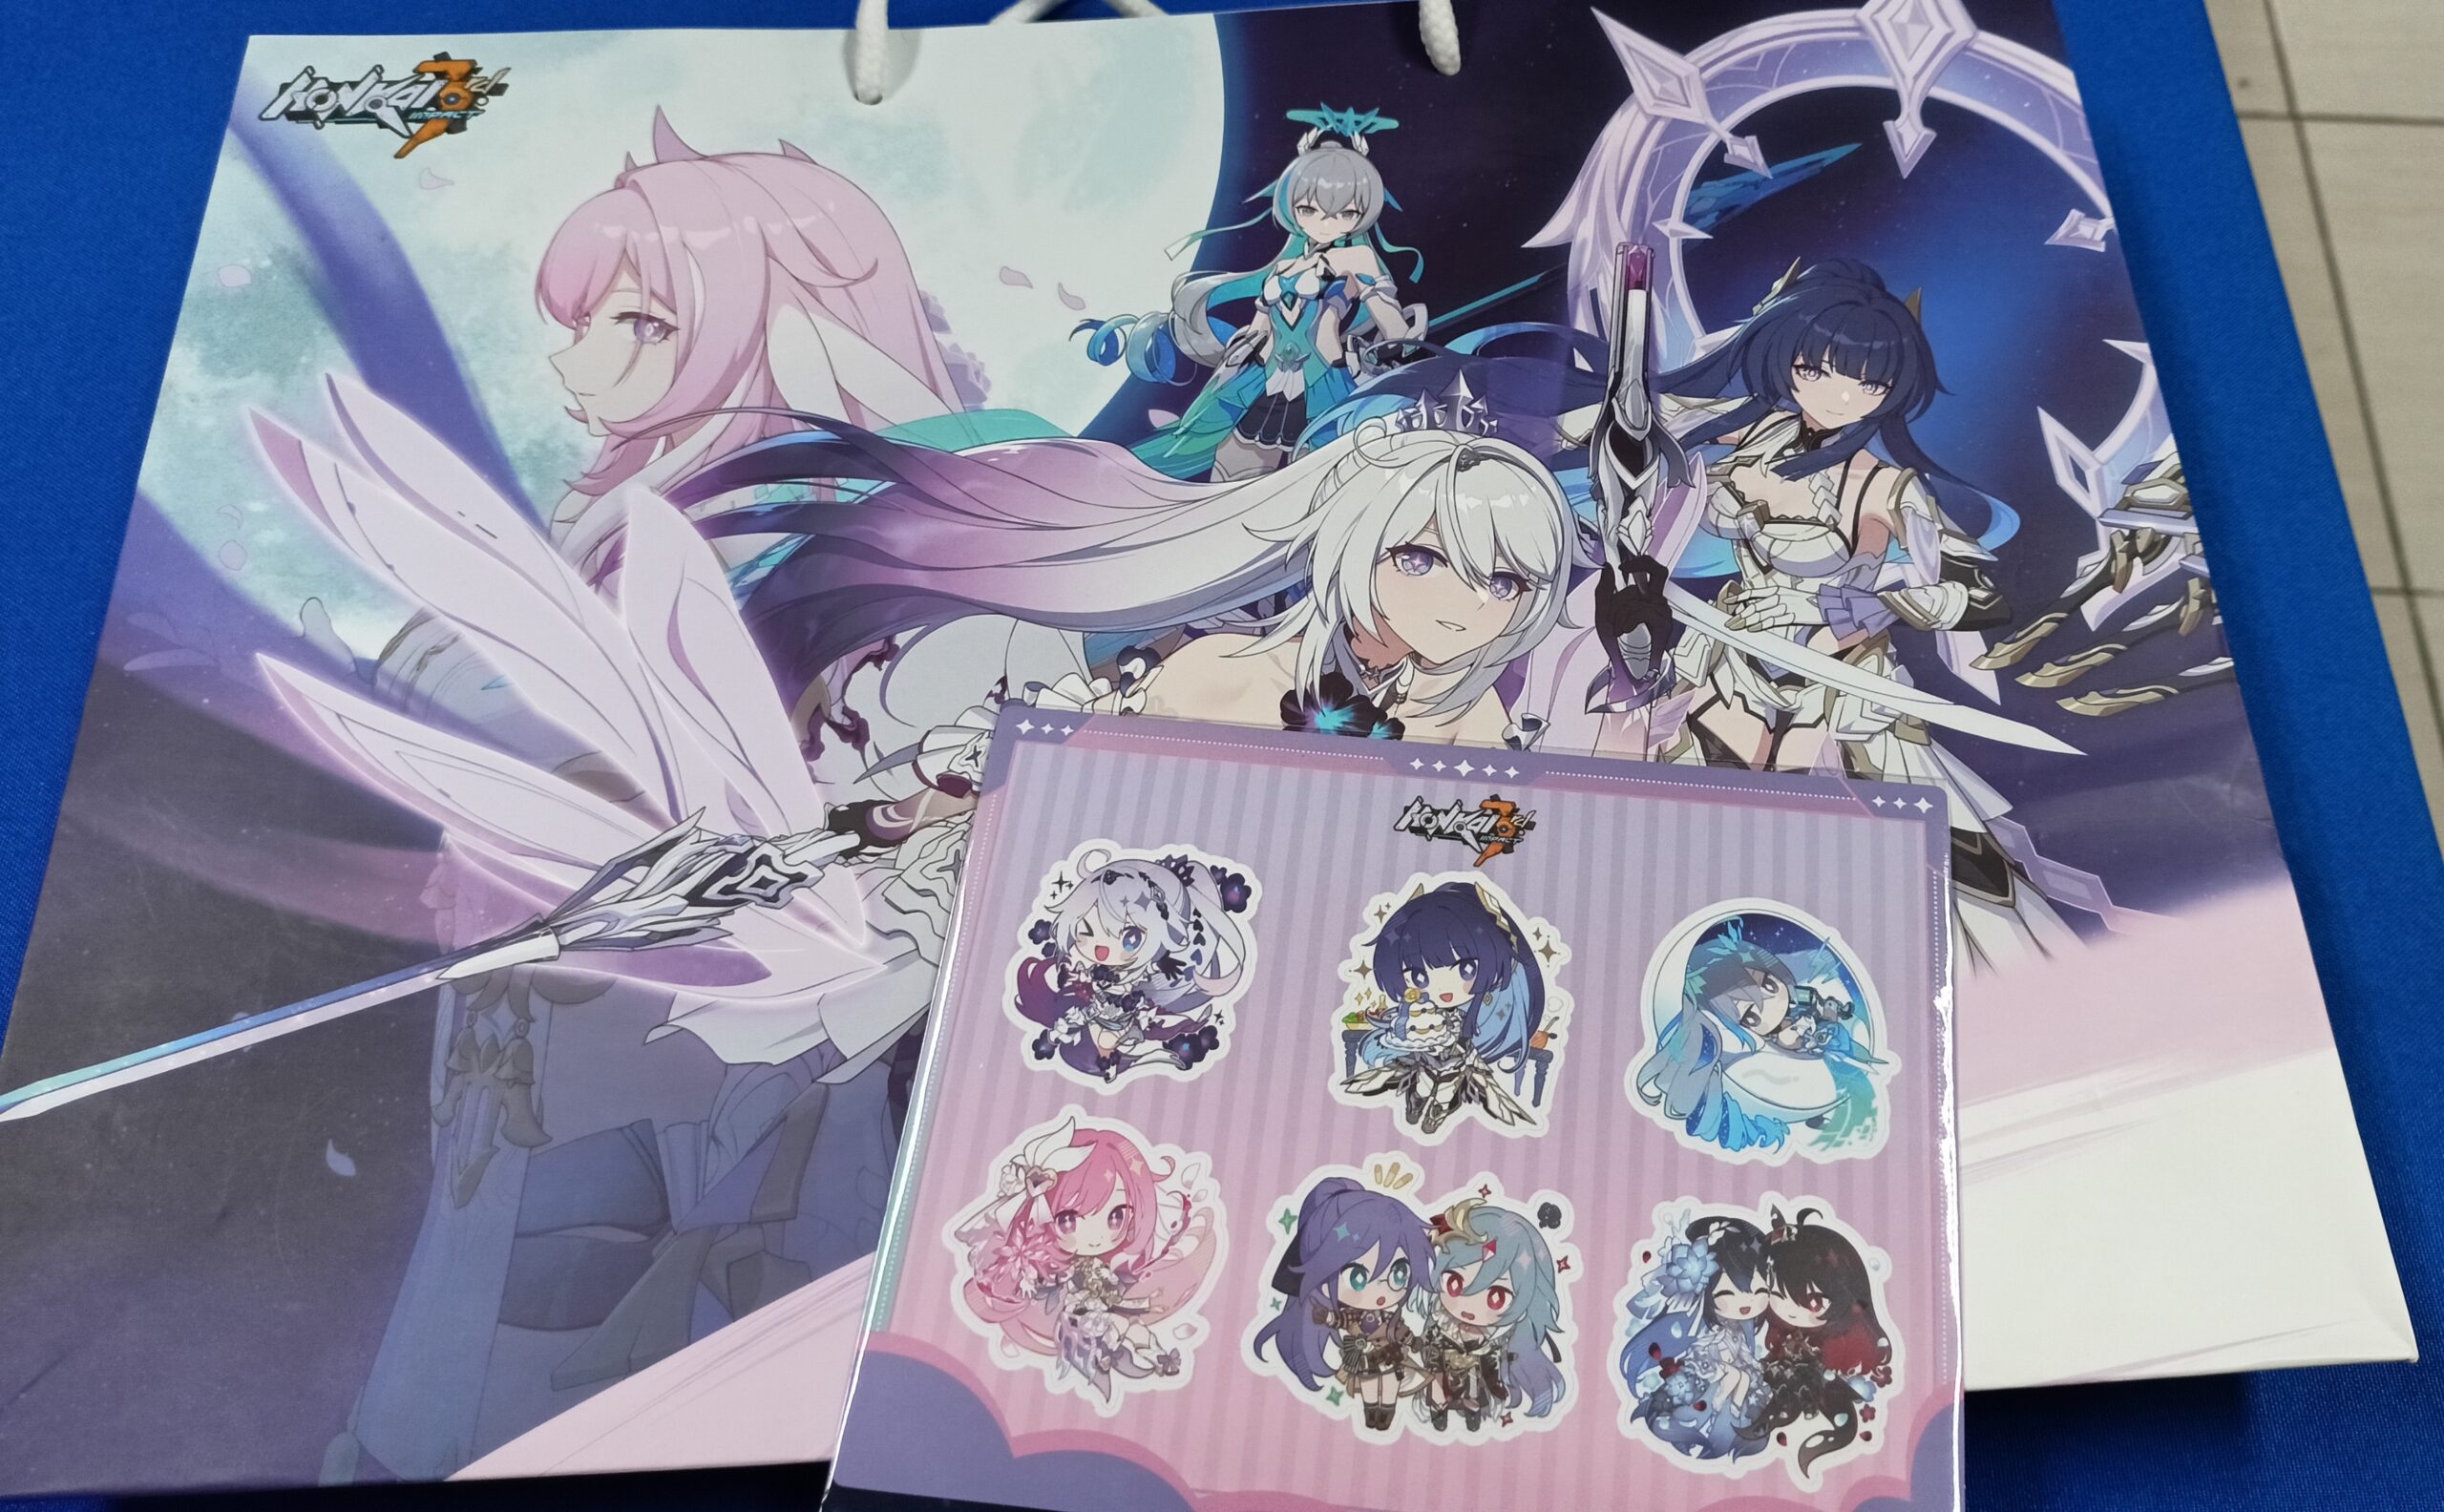 Honkai-Impact-3rd-Art-Collection-Volume-2-Now-Available-in-the-Philippines!-2